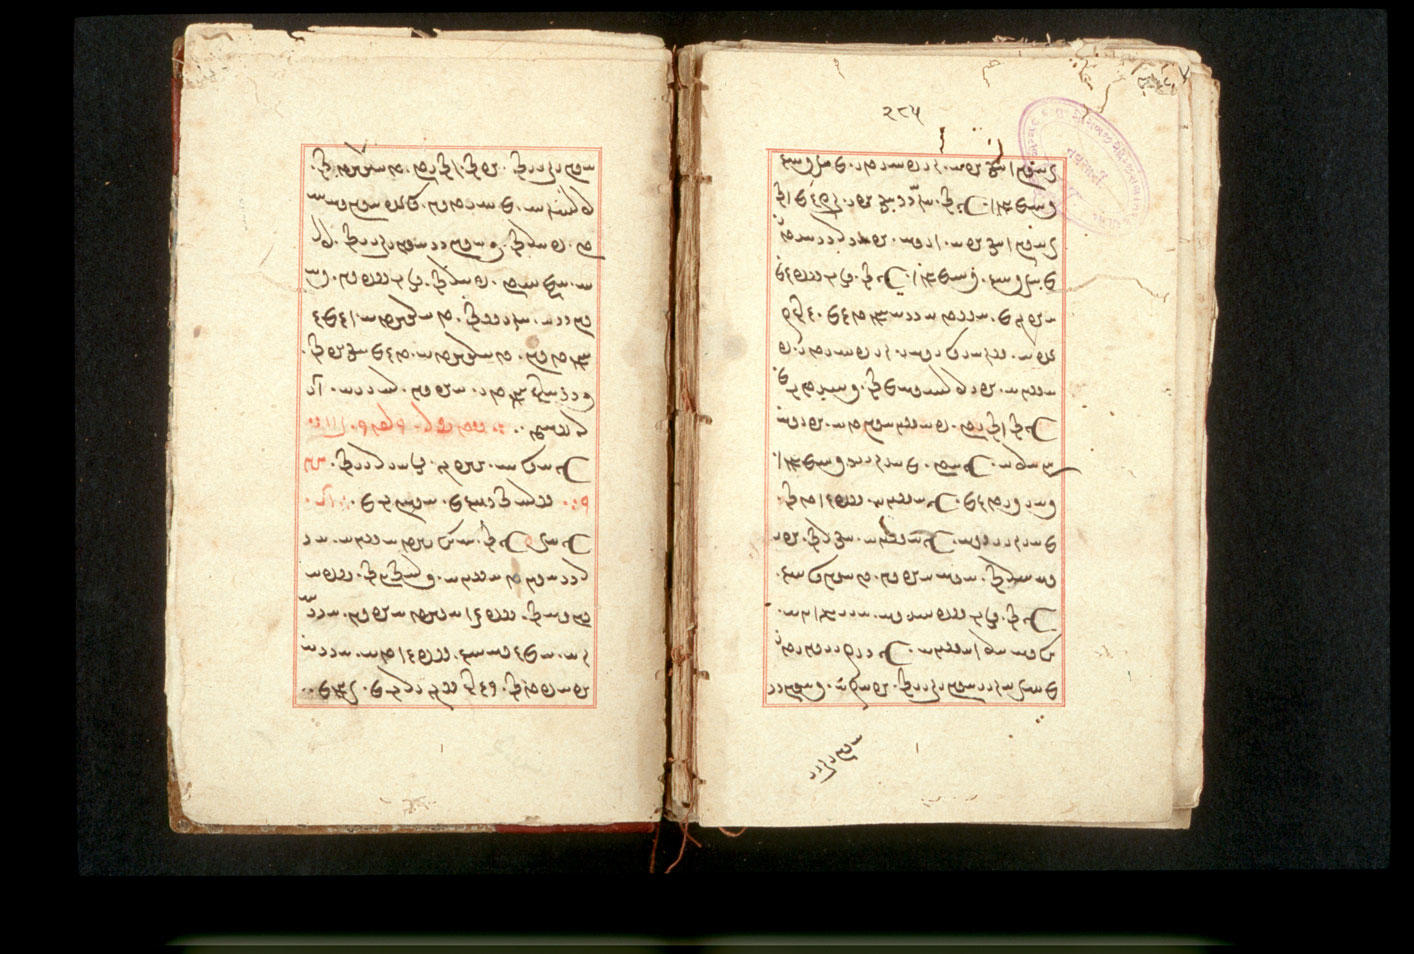 Folios 285v (right) and 286r (left)